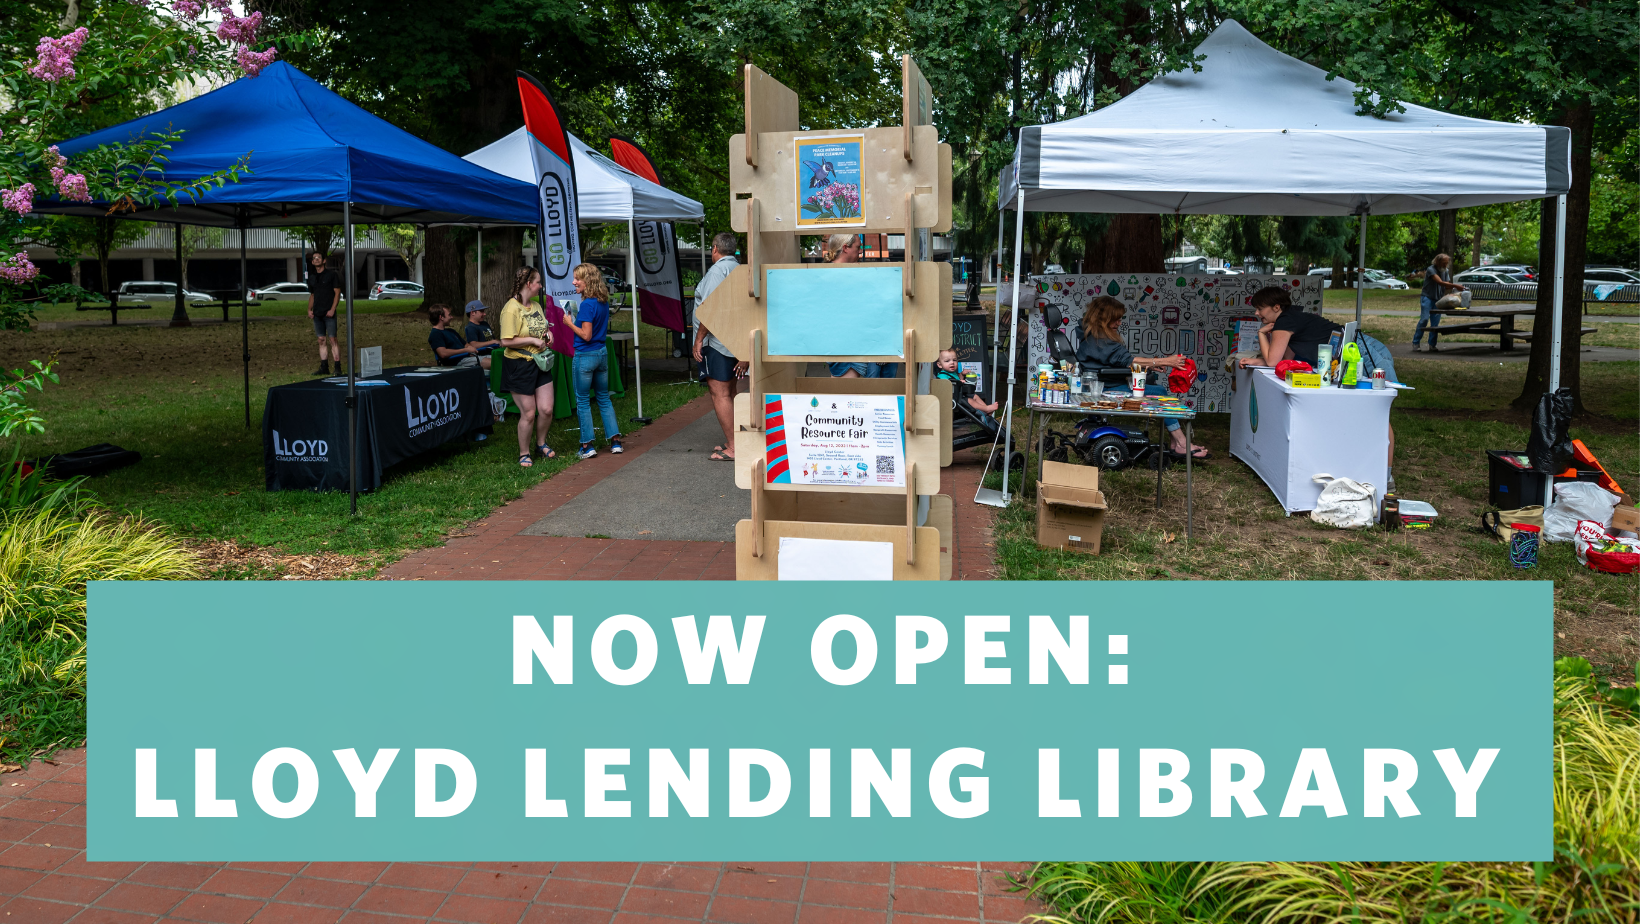 A picture of a Lloyd EcoDistrict event in Holladay Park featuring multiple tent canopies and the words "Now Open: Lloyd Lending Library" overlaid.